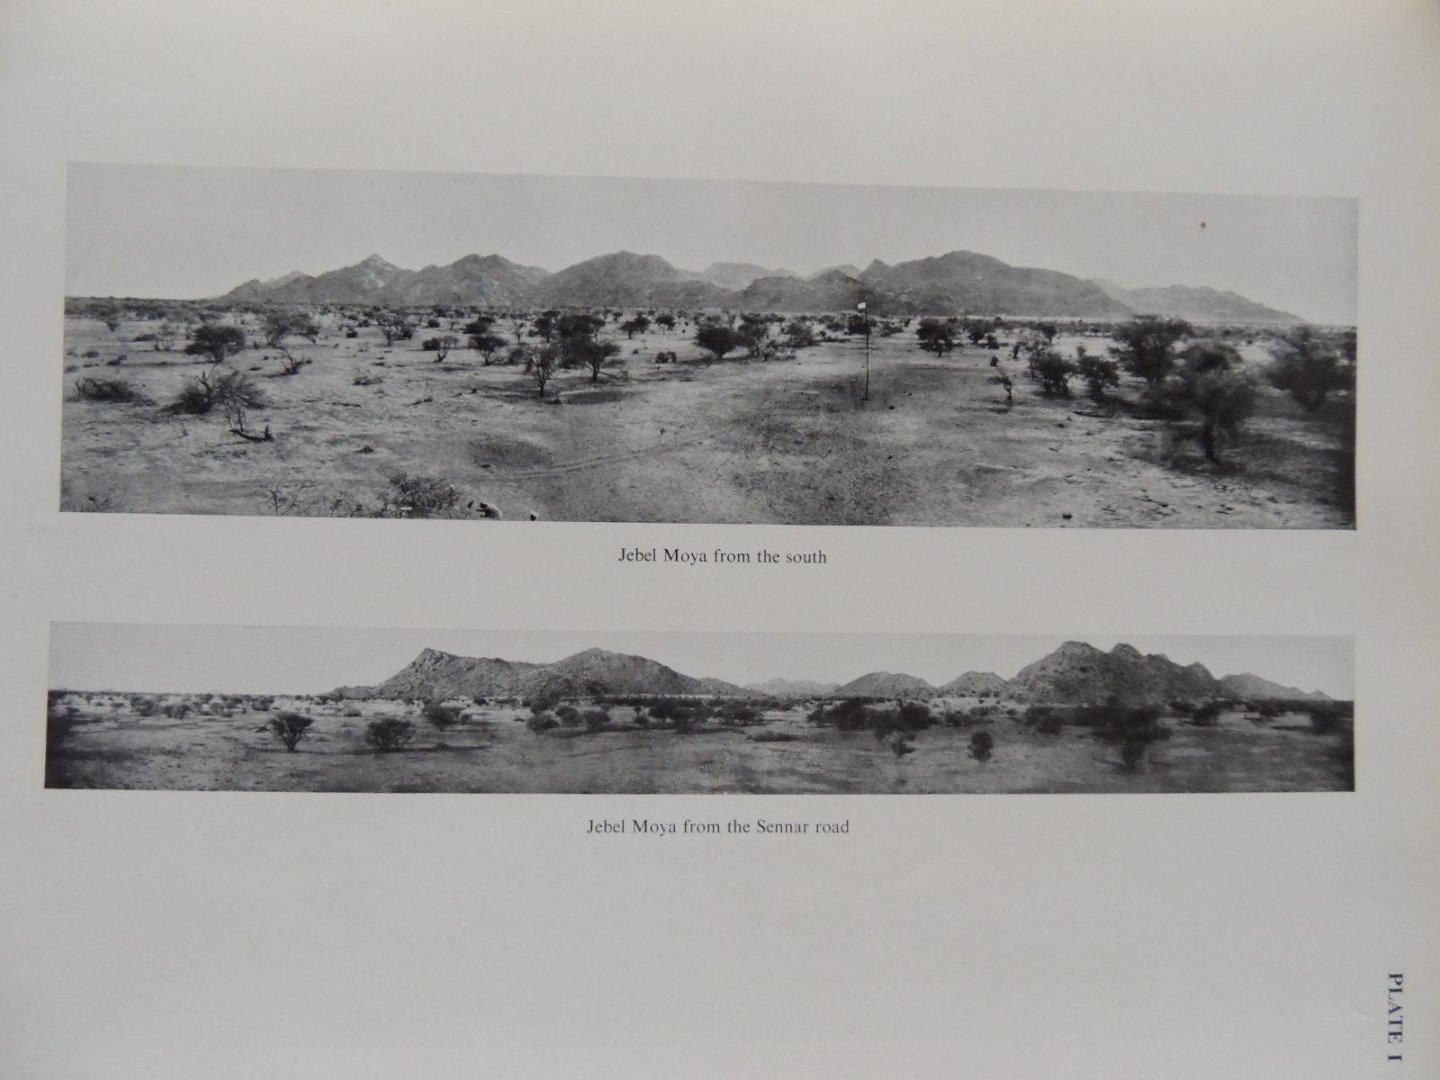 Addison, Frank F. -  Abu Geili and Saquadi & and Dar el Mek. With a chapter by A.D. Lacaille. - The Wellcome Excavations in the Sudan, I - II - III Jebel Moya. Text & and plates. VOLUME 1 -2 - 3.  COMPLETE SERIE